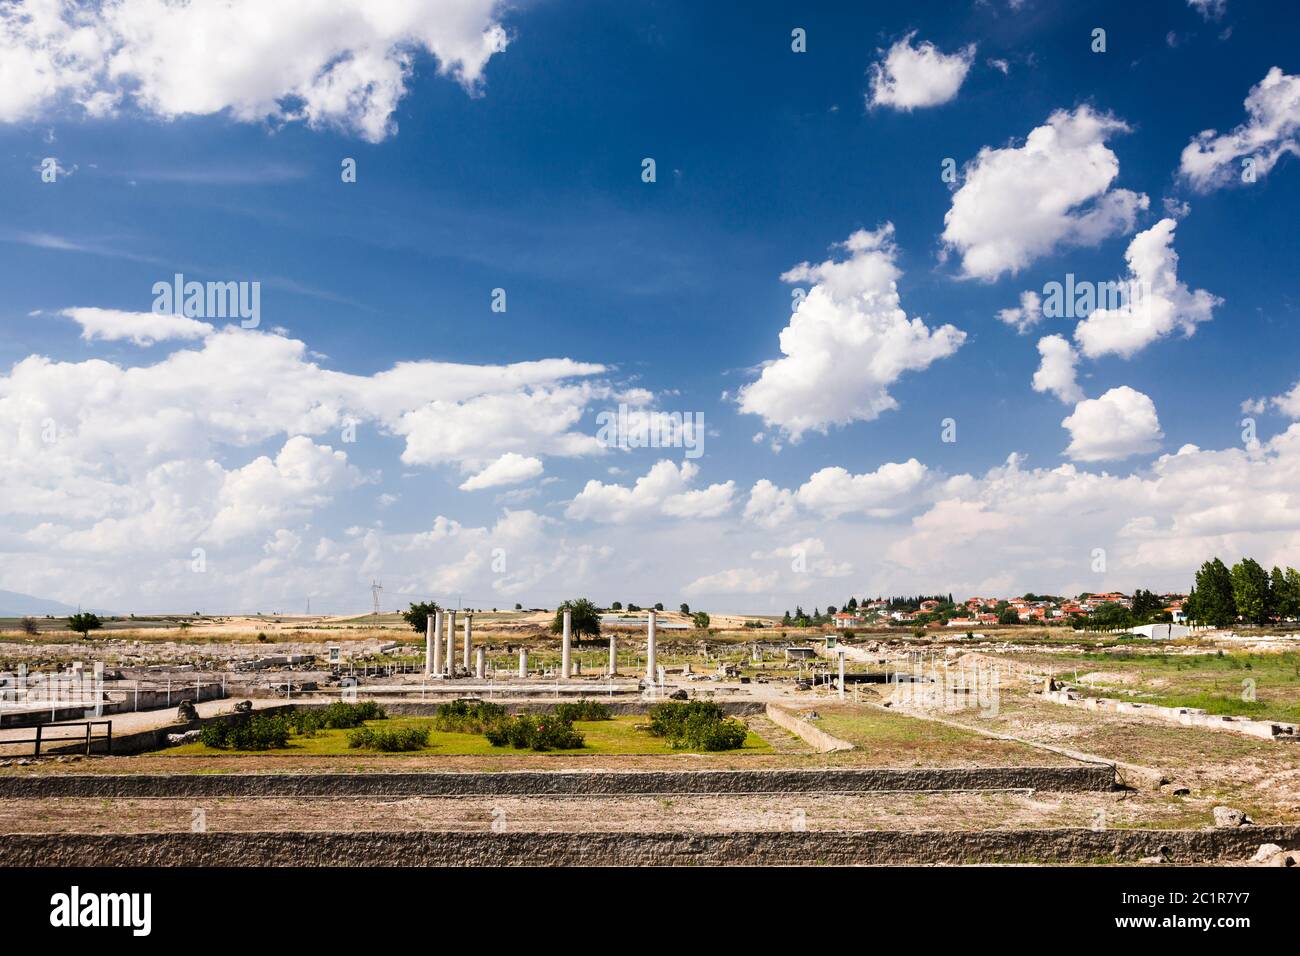 Archaelogical Site of Pella, Ancient capital of Macedon kingdom, Birthplace of Alexander the Great, Pella, Central Macedonia,Greece,Europe Stock Photo